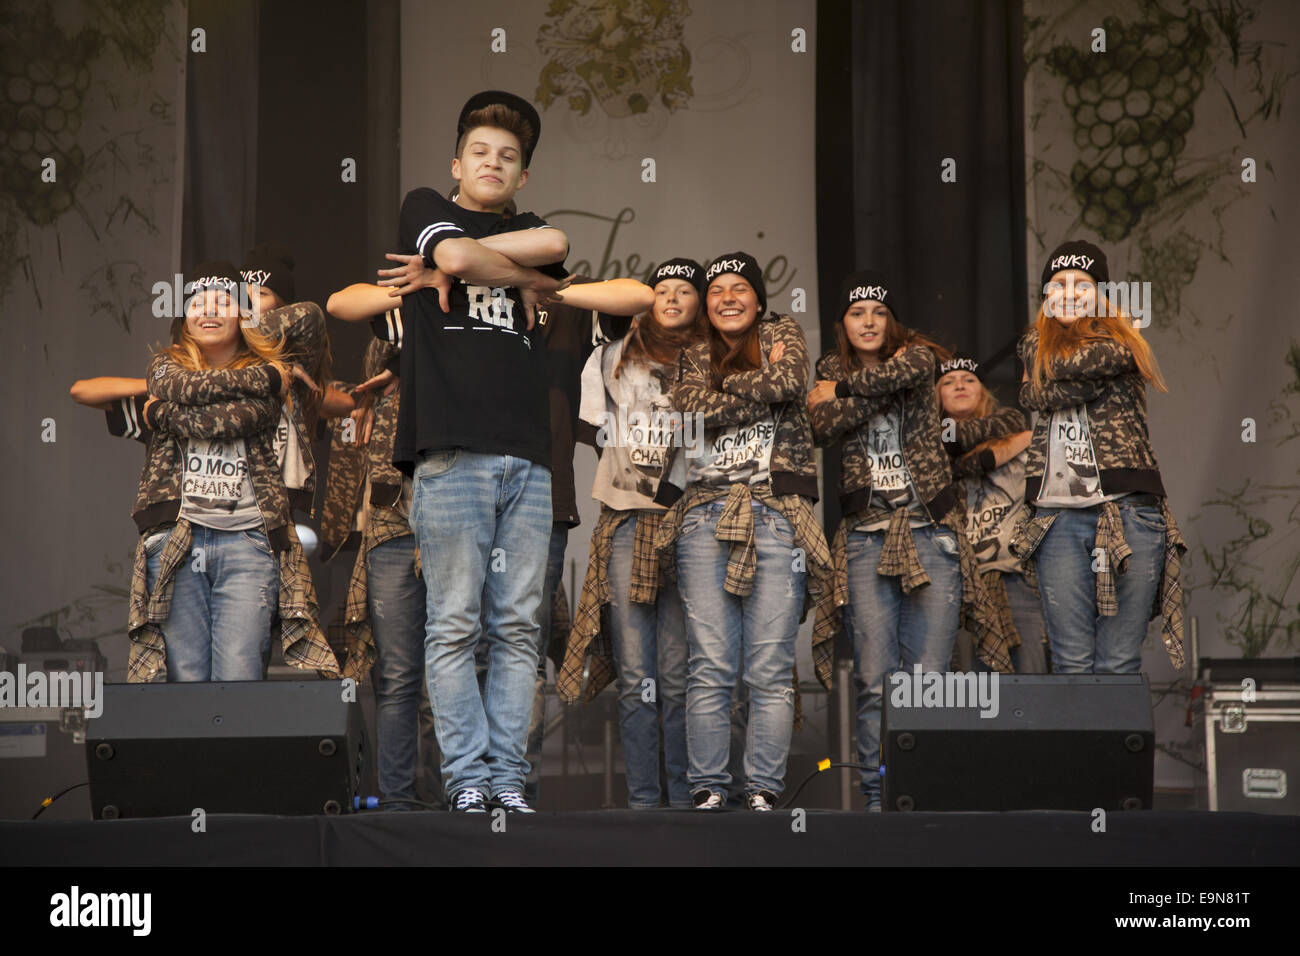 High School age dance group influenced by hip-hop performs at a city festival in Zielona Gora, Poland. Stock Photo